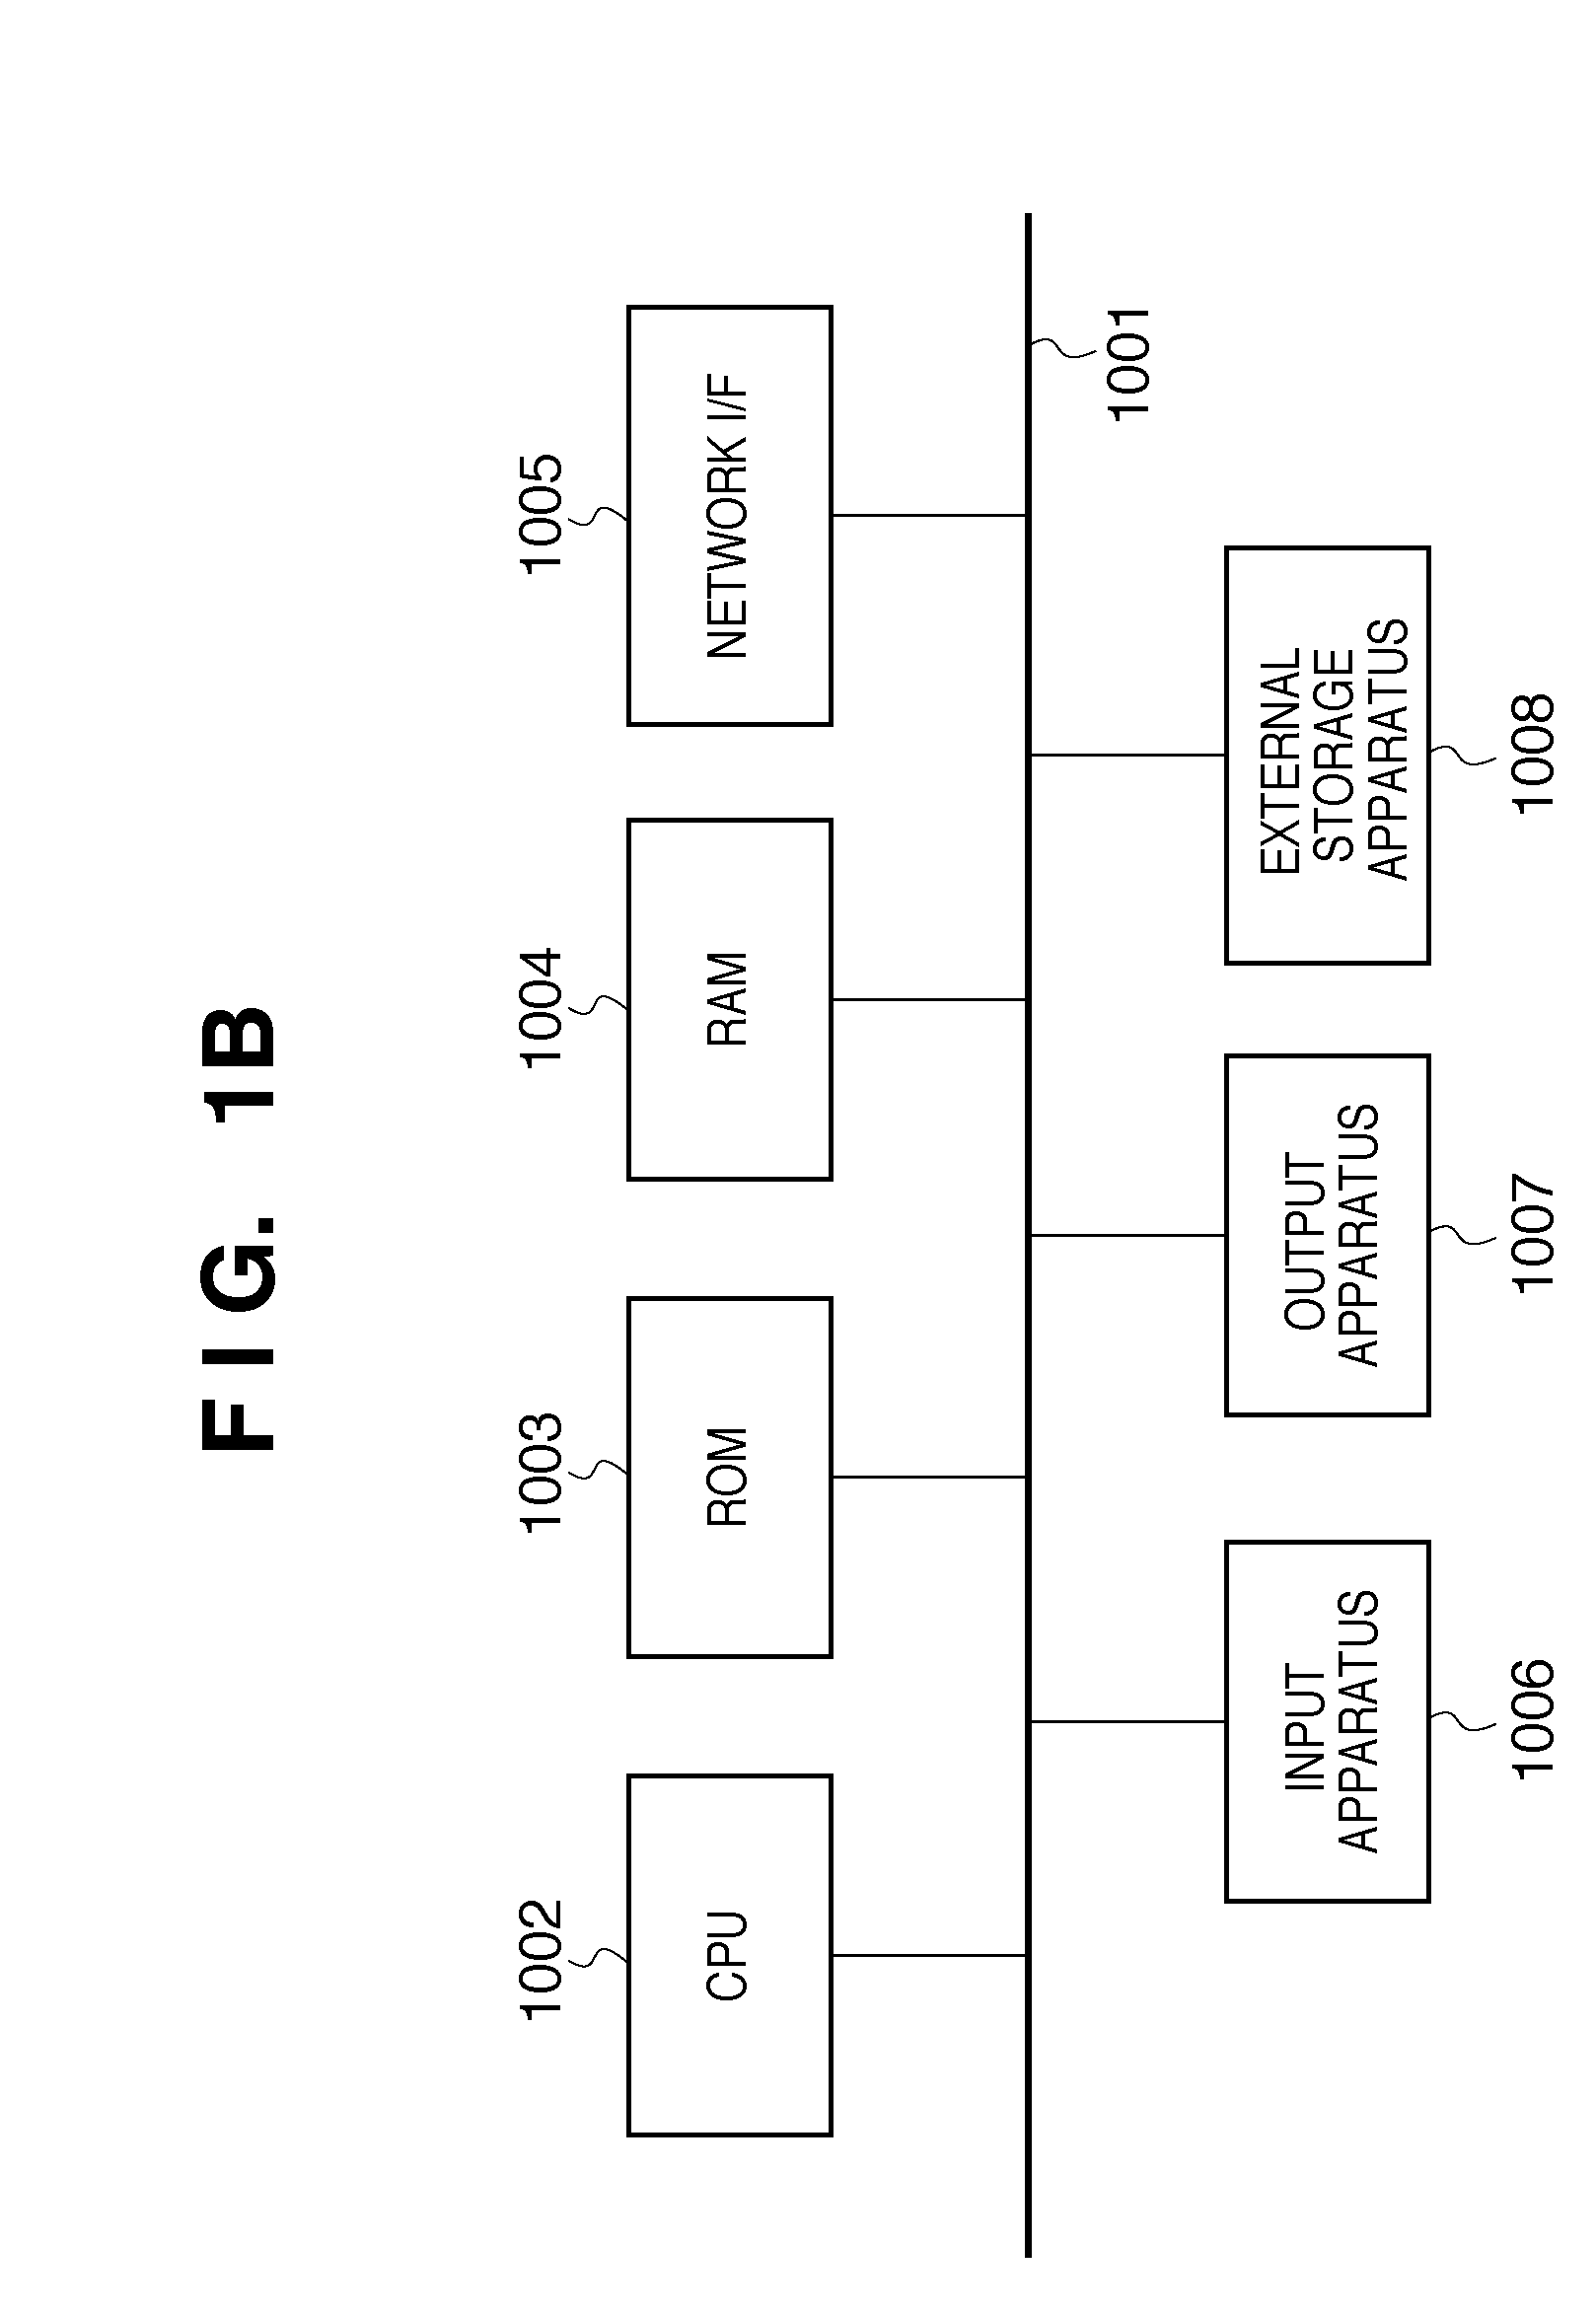 Moving image processing apparatus, control method thereof, and program